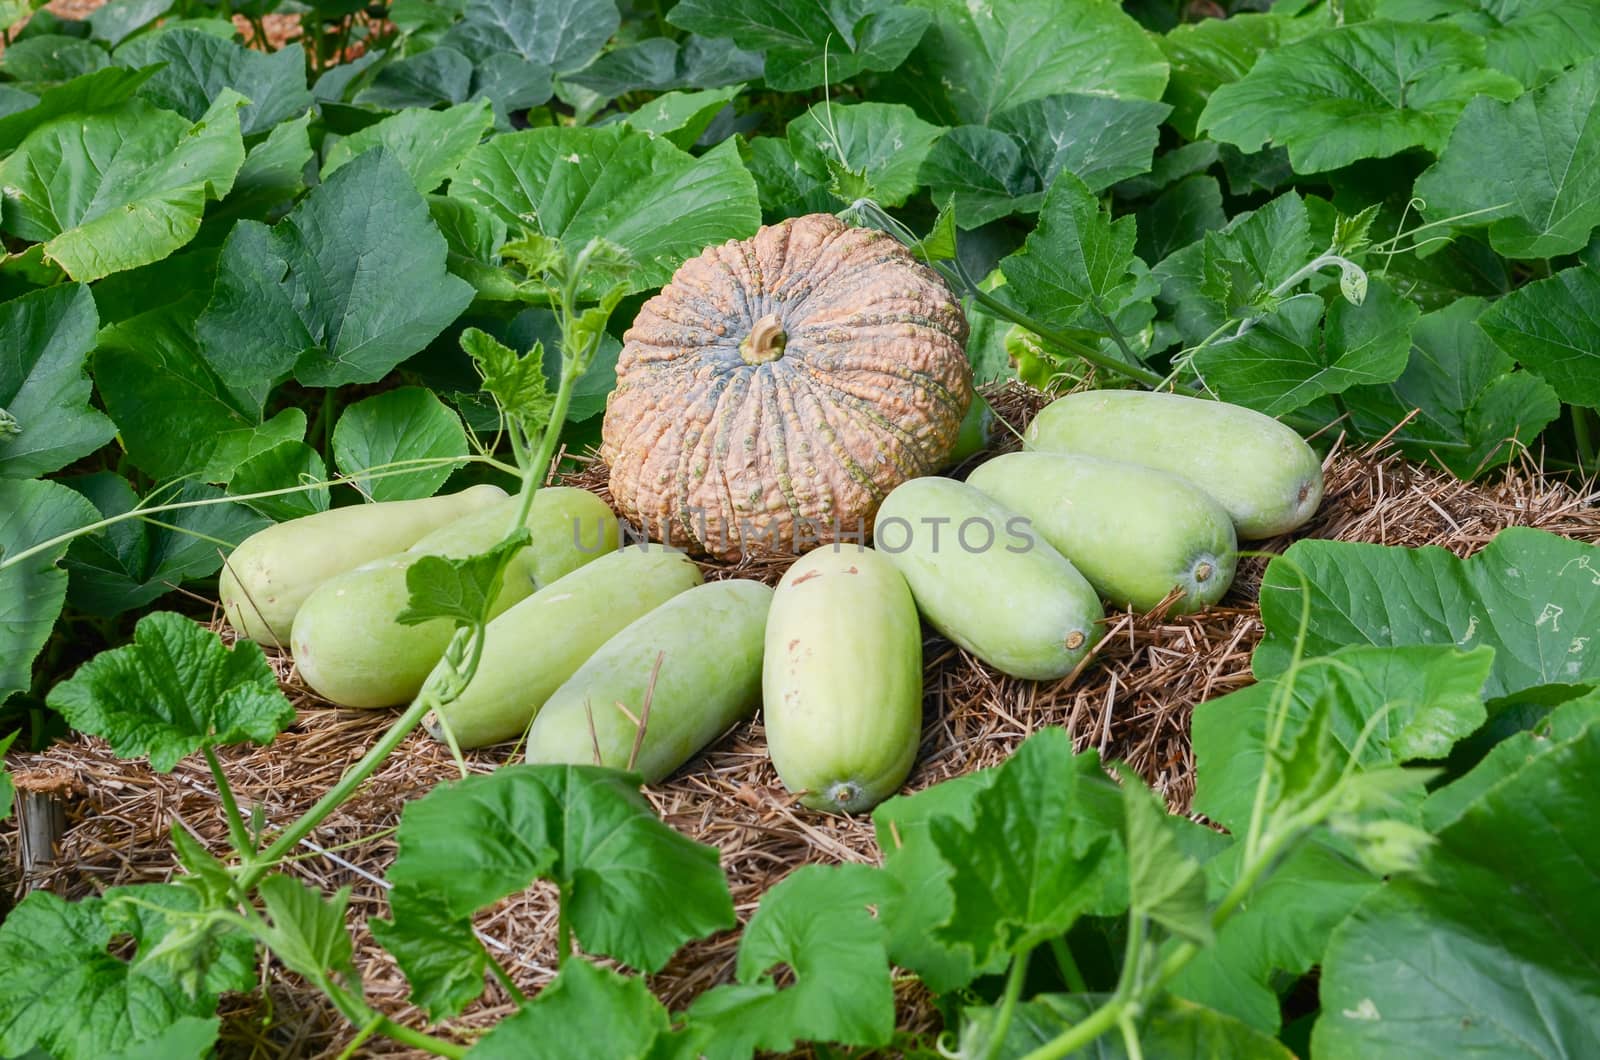 Wax gourd and pumpkin on the straw in the pumpkin patch.